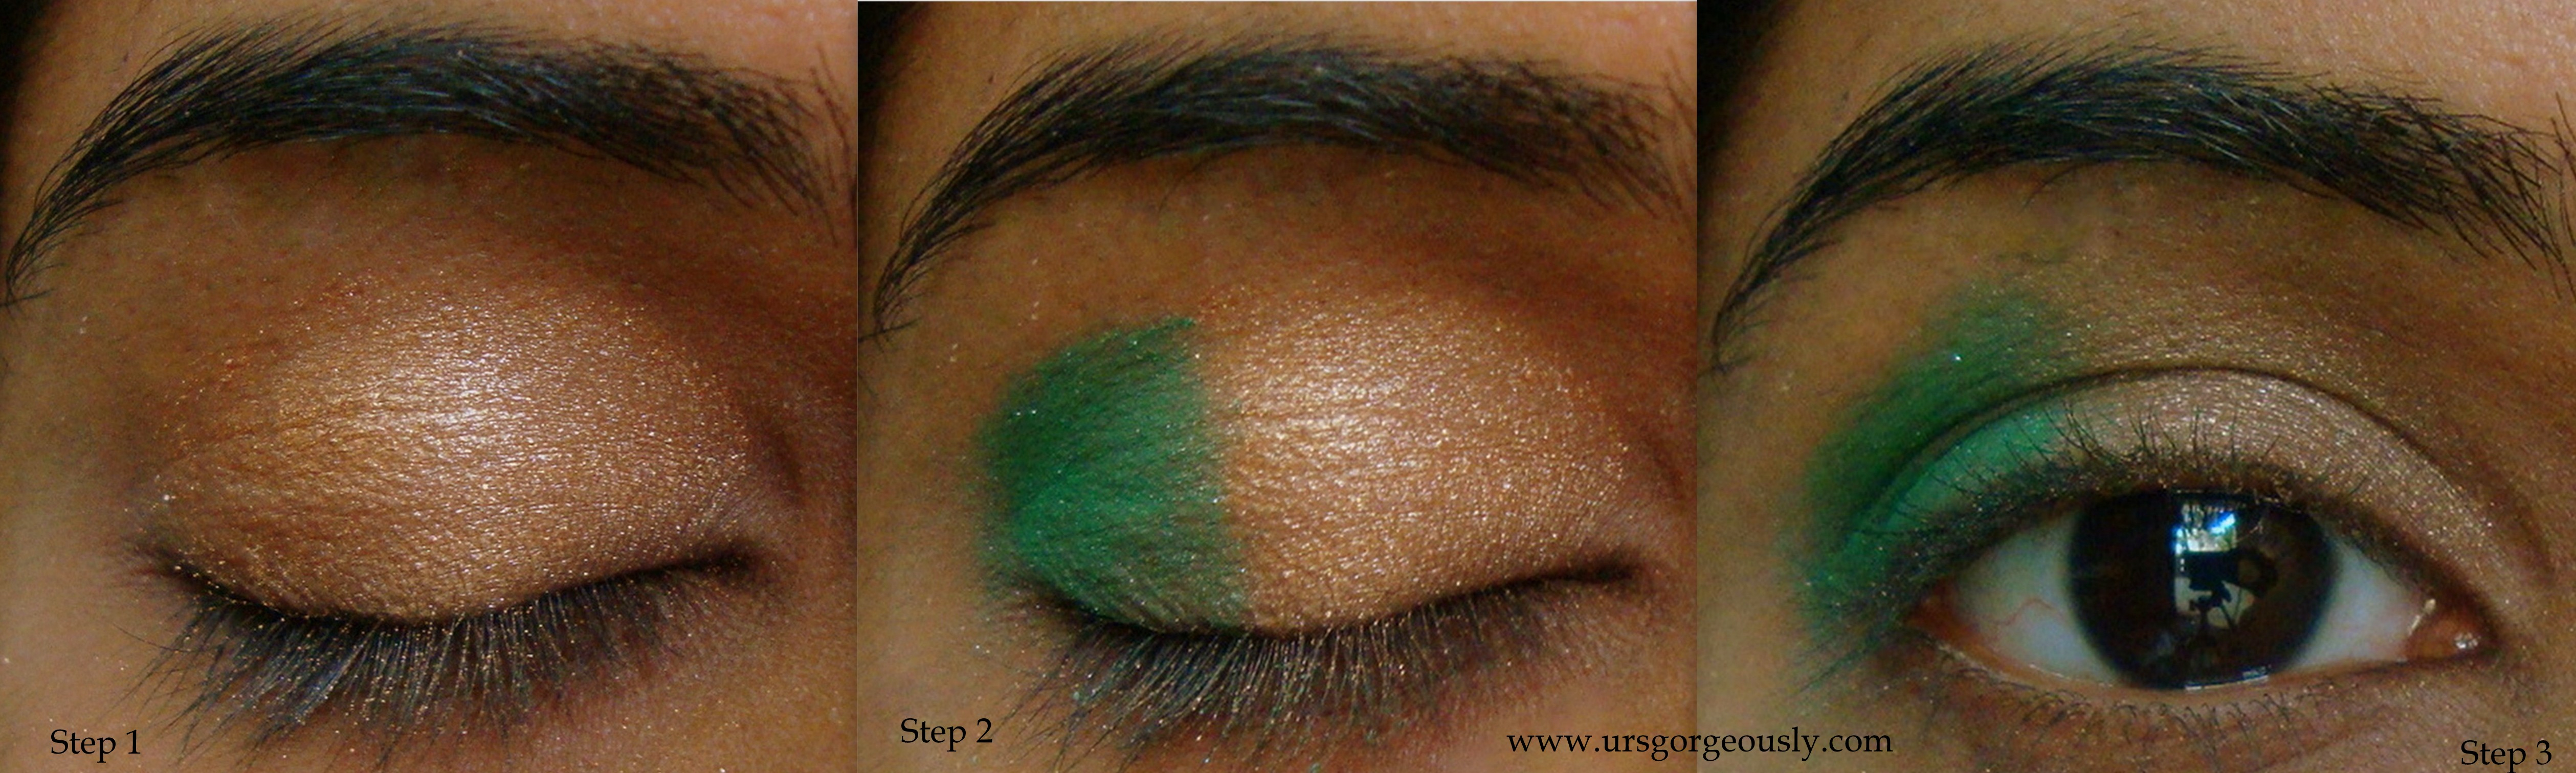 Green Eye Makeup Tutorial 6 Simple Steps For A Gold And Green Eye Makeup Tutorial Ursgorgeously